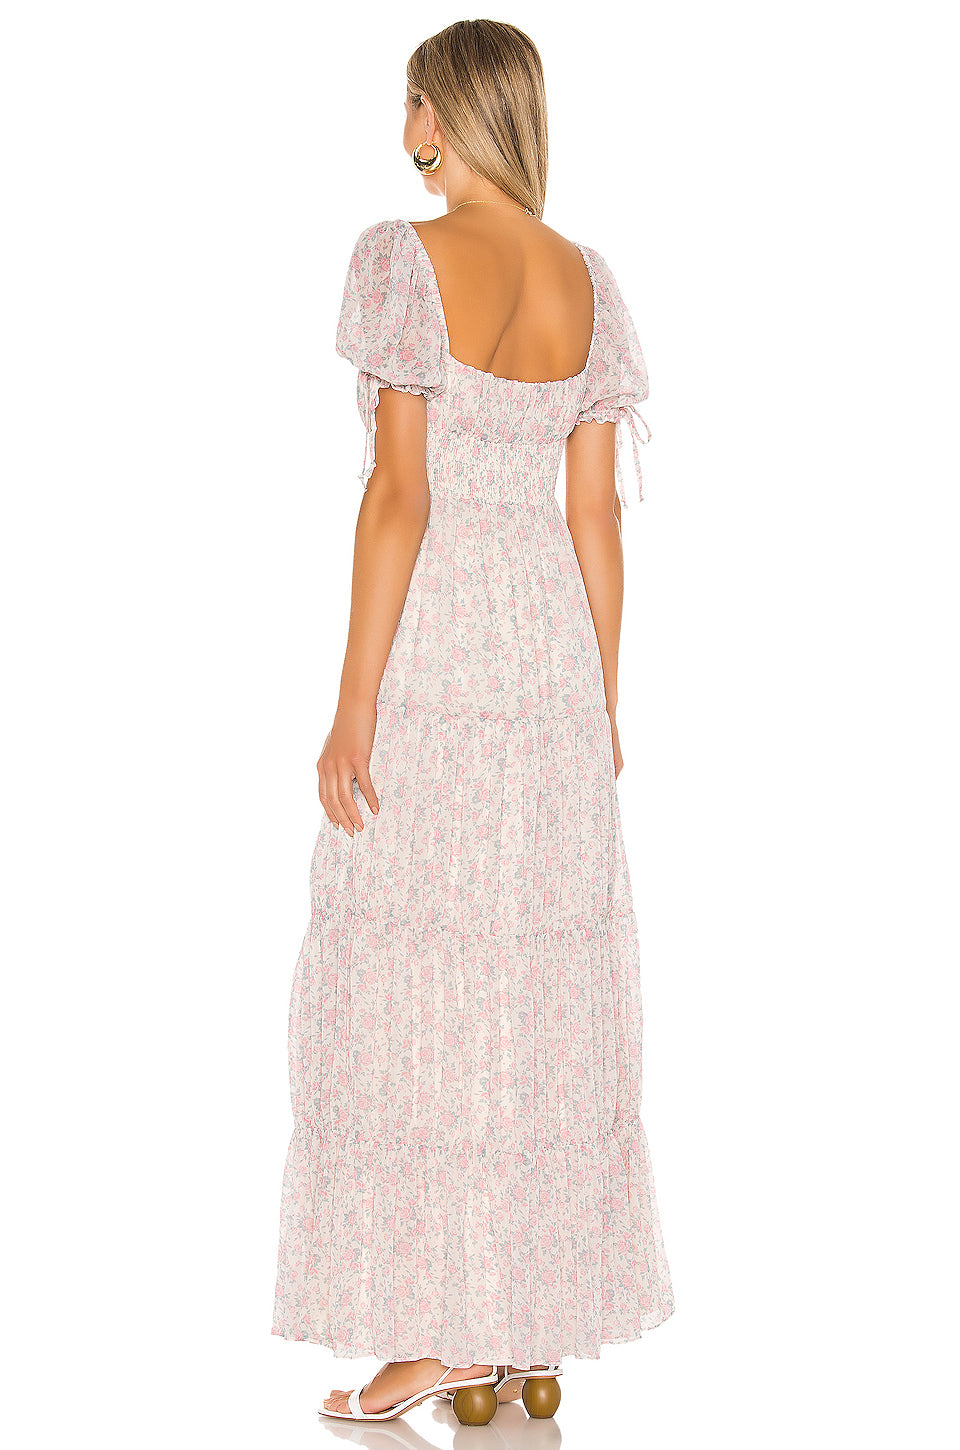 Annalyse Dress in IVORY ROSE BLOOMS